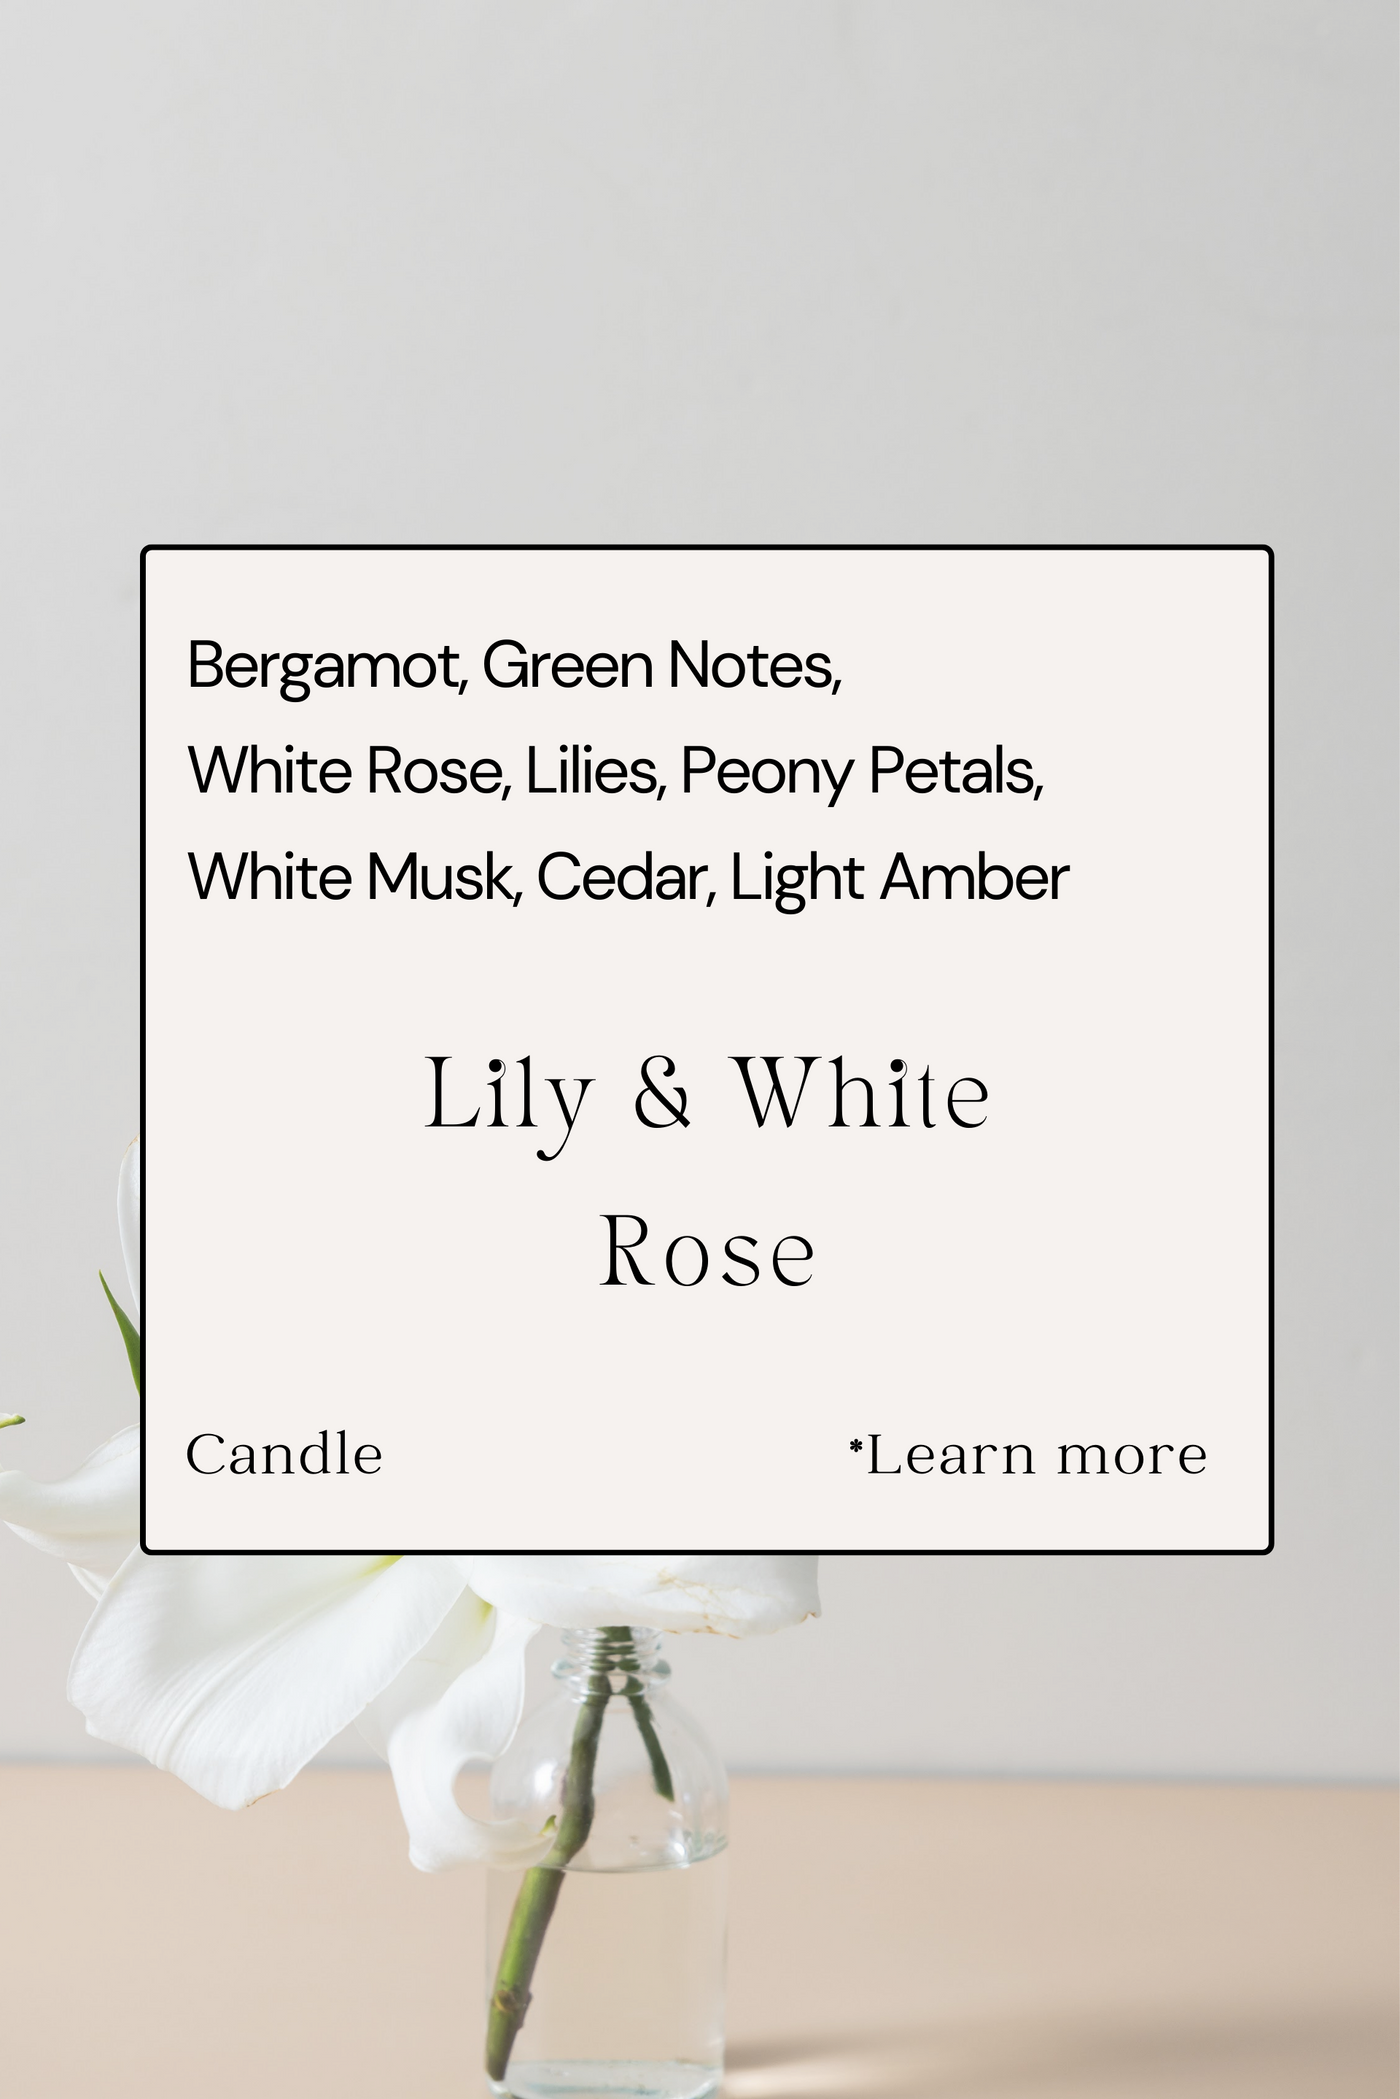 LILY & WHITE ROSE